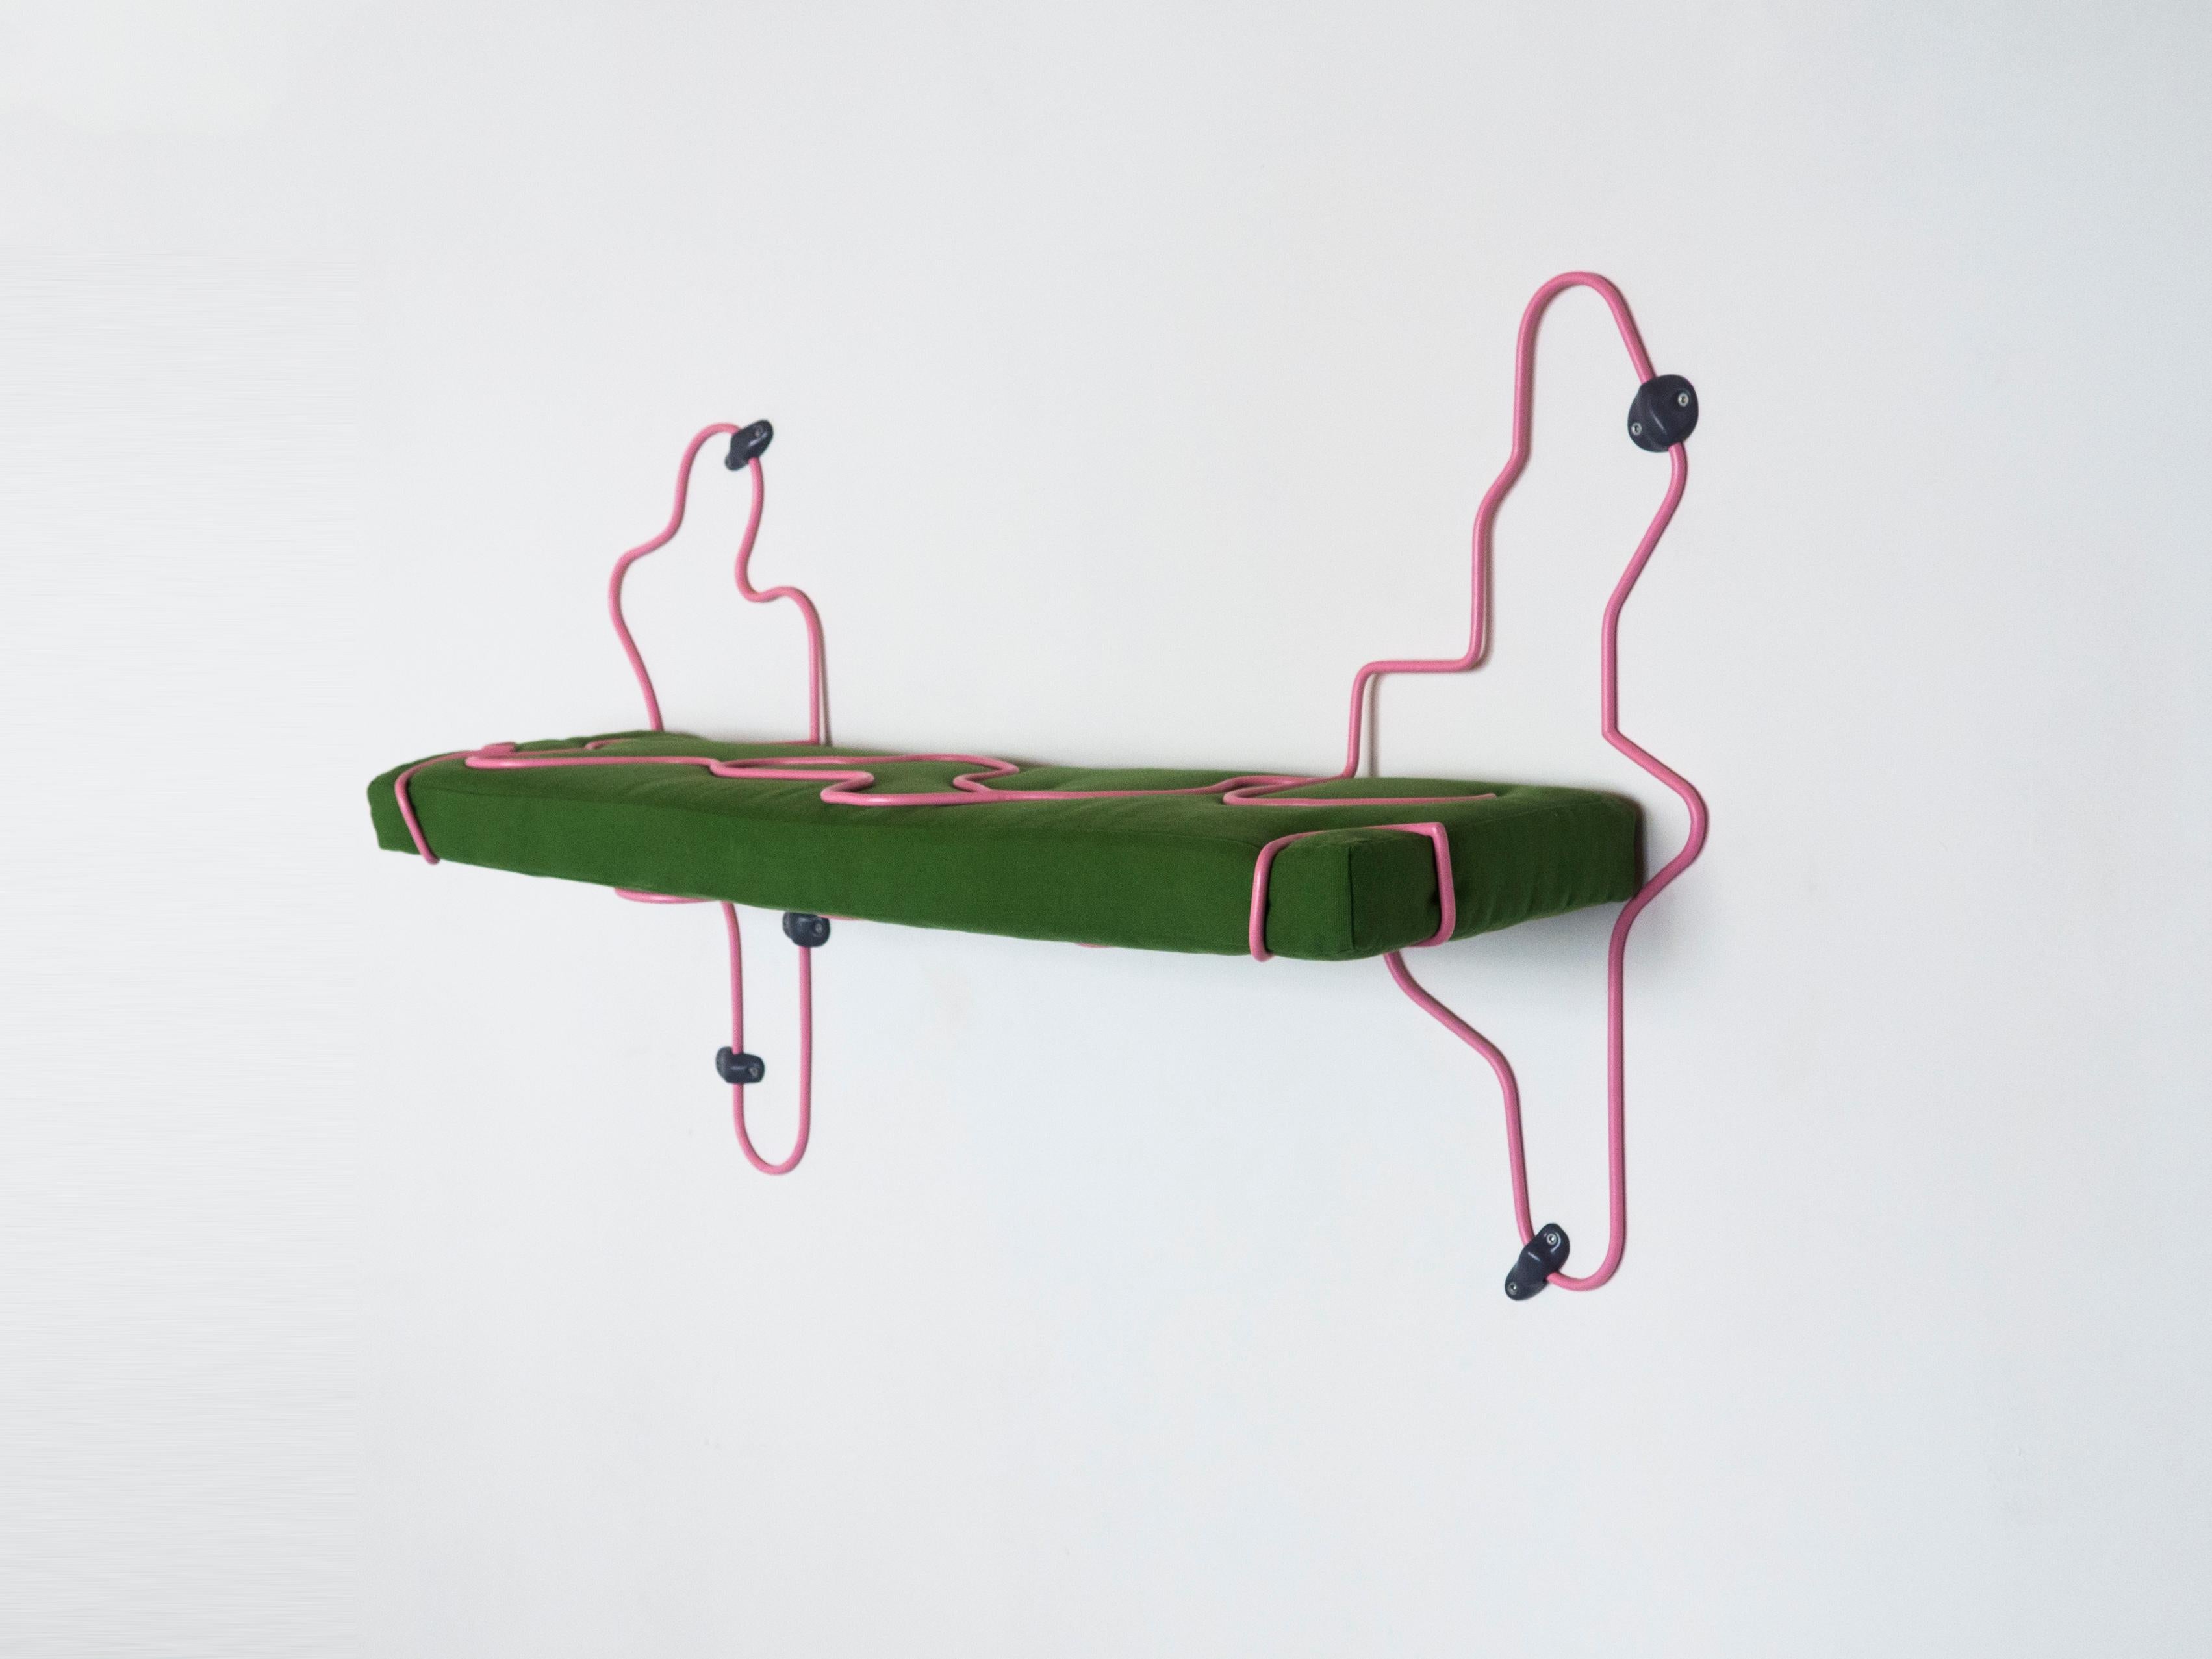 Soft shelves green by Manon Ritaly
Dimensions: 100 x 65 x 30cm
Materials: Steel, fabric, foam, ceramic


Manon Ritaly, Designer, visual artist, dreamer exercises her practice in Paris where she explores new ways of interacting with objects with